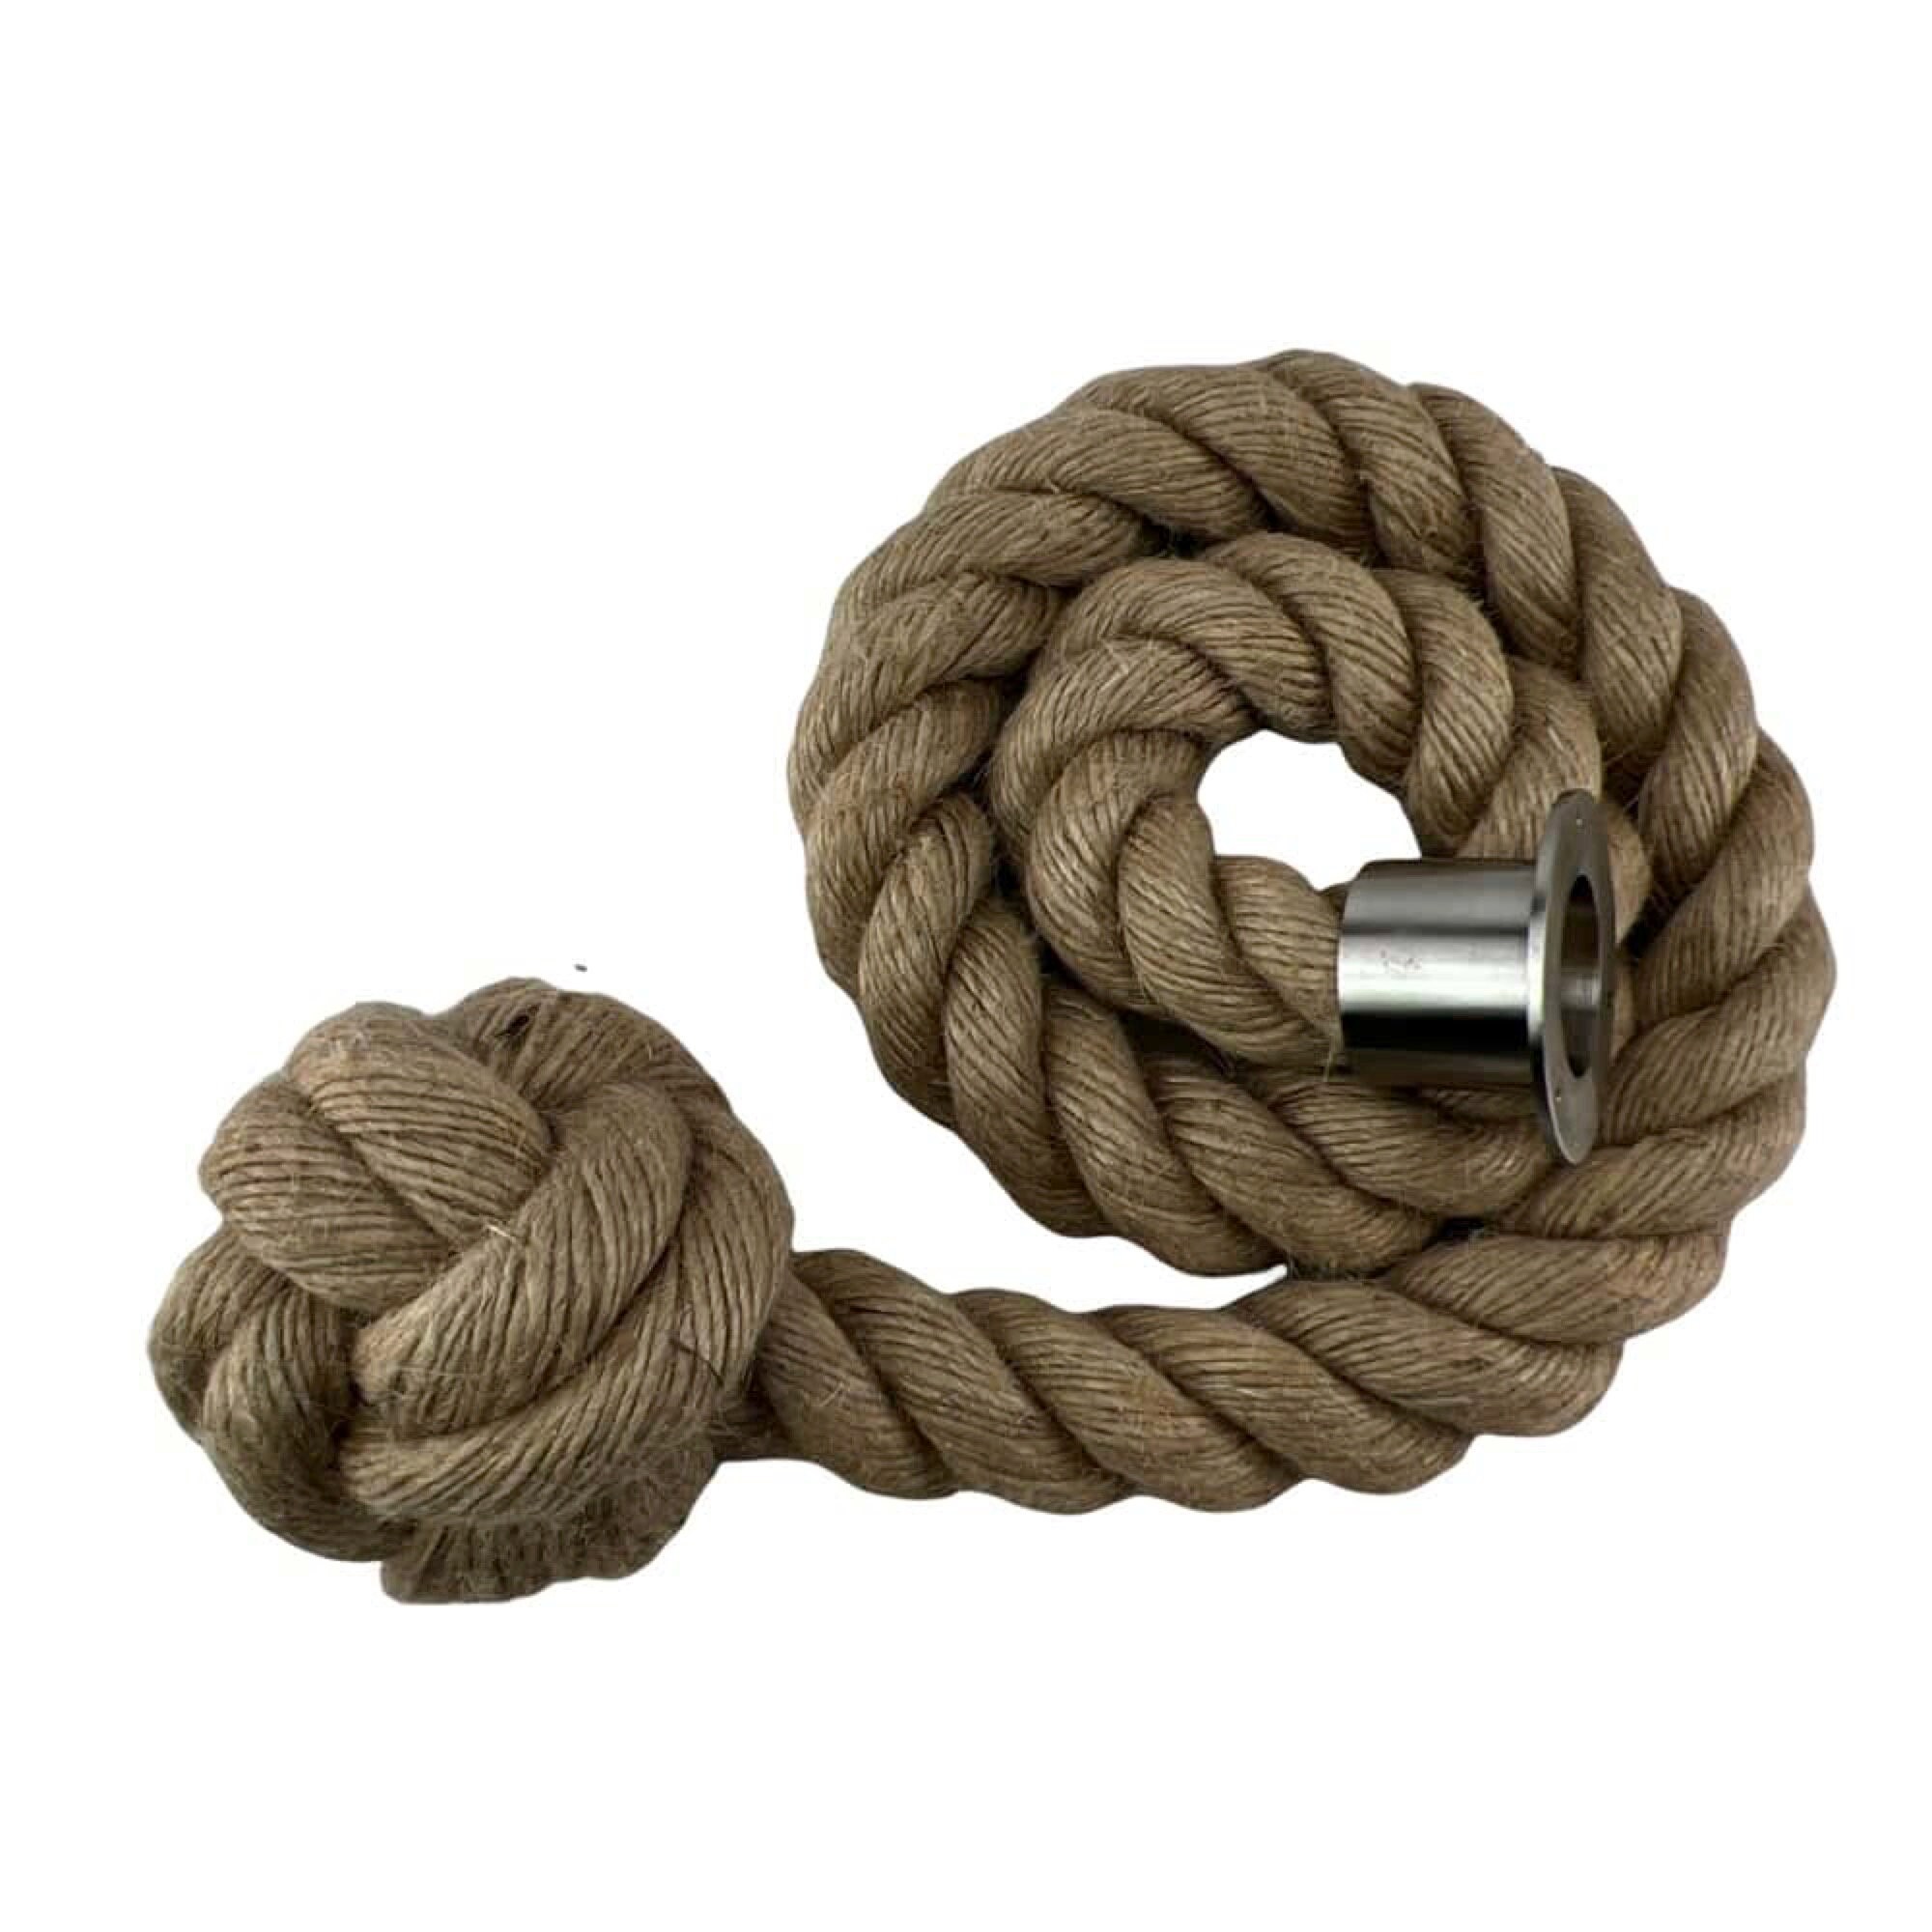 Natural Jute Barrier Rope With Hooks & Eye Plates - RopeServices UK